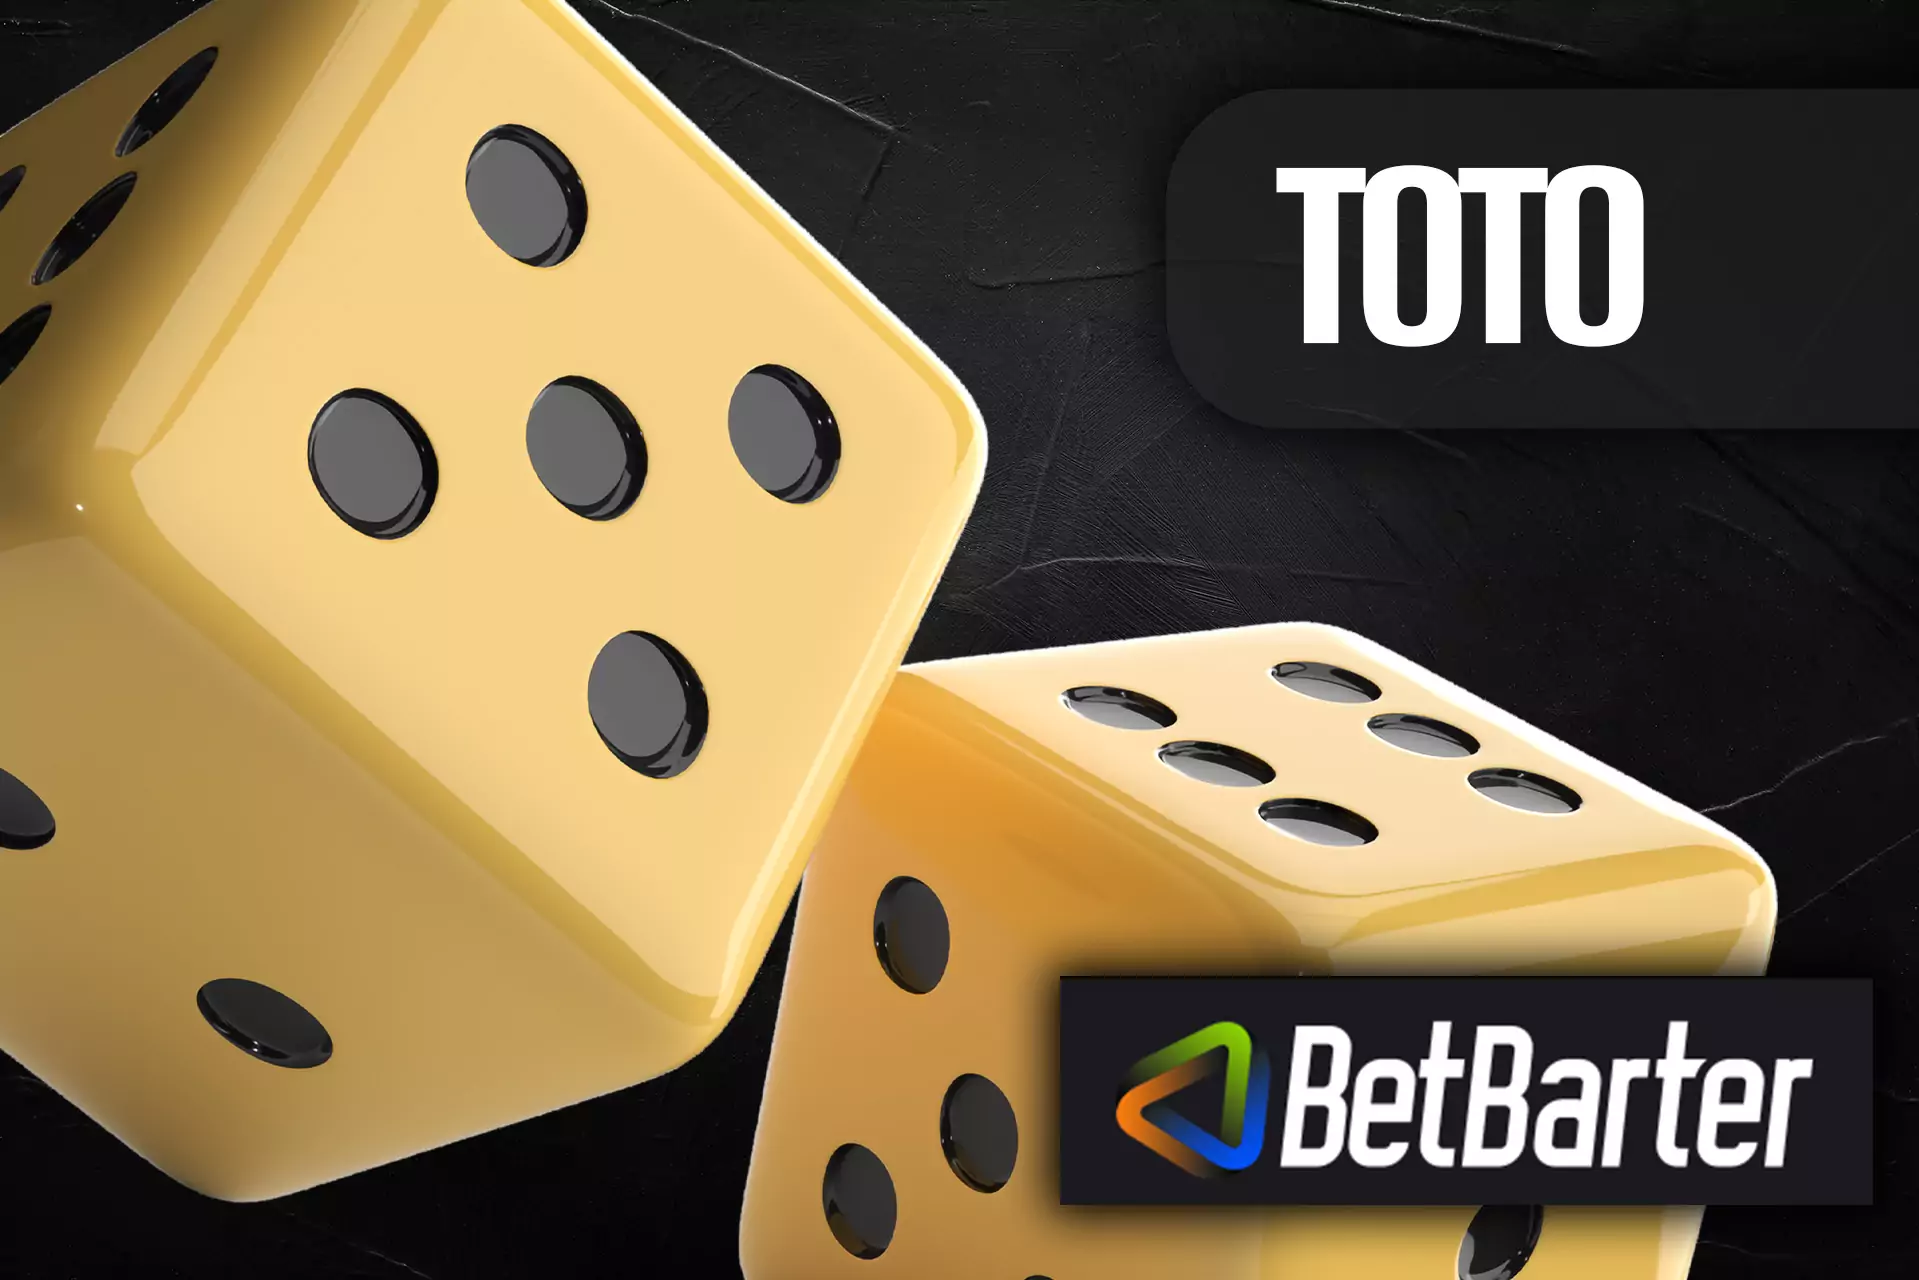 New TOTO games appear on Betbarter regularly.